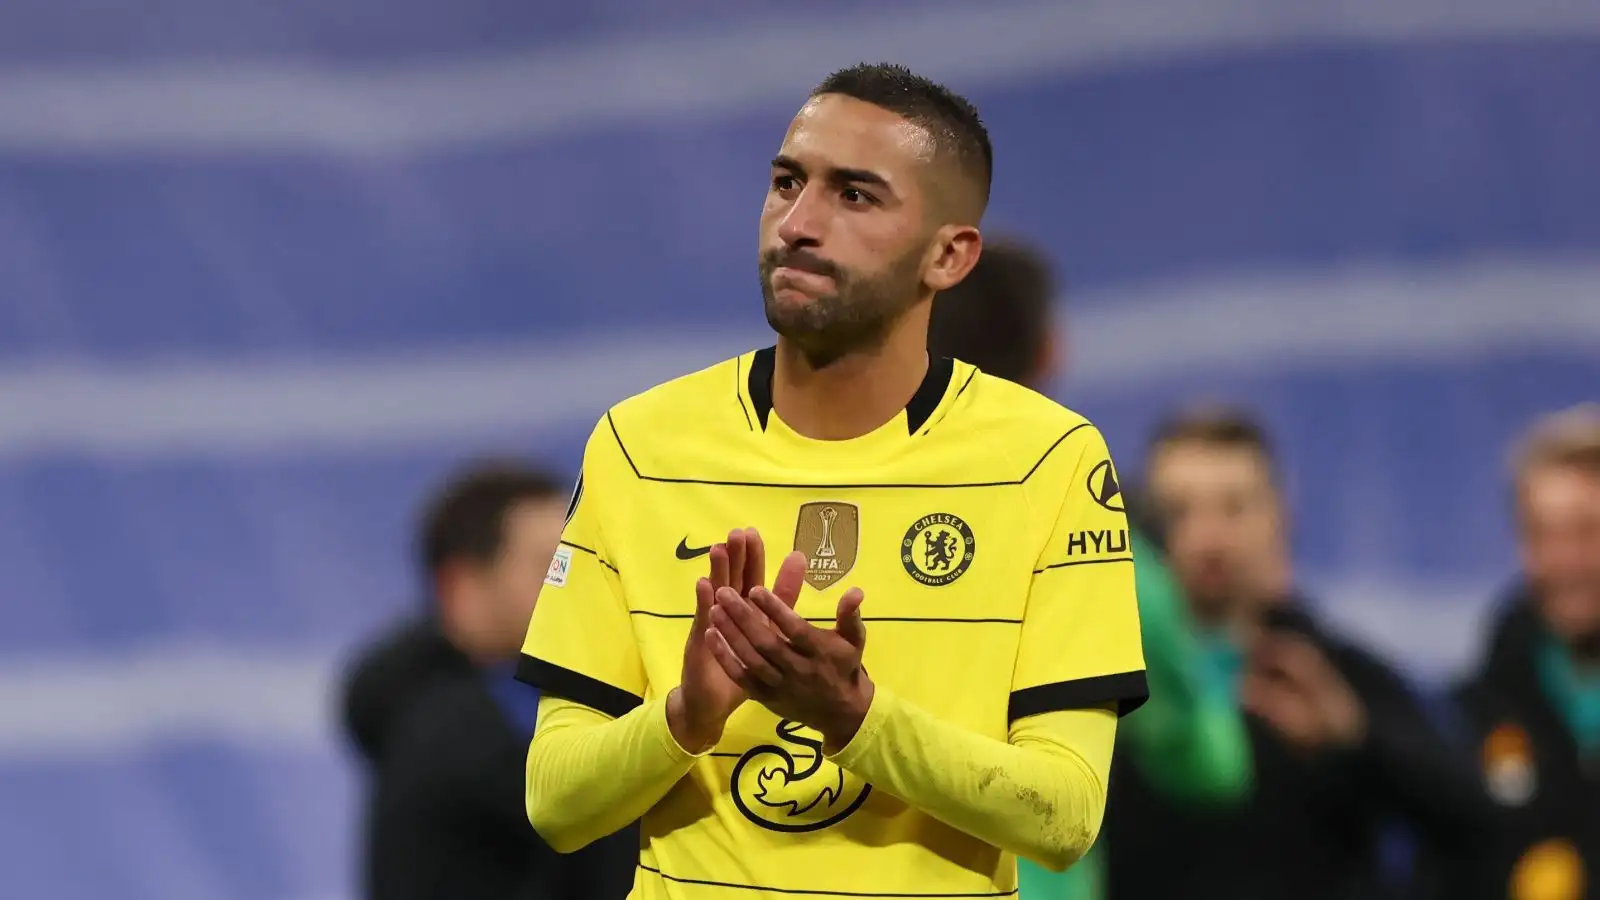 Hakim Ziyech of Chelsea FC applauds the fans following the final whistle of the UEFA Champions League match at the Bernabeu